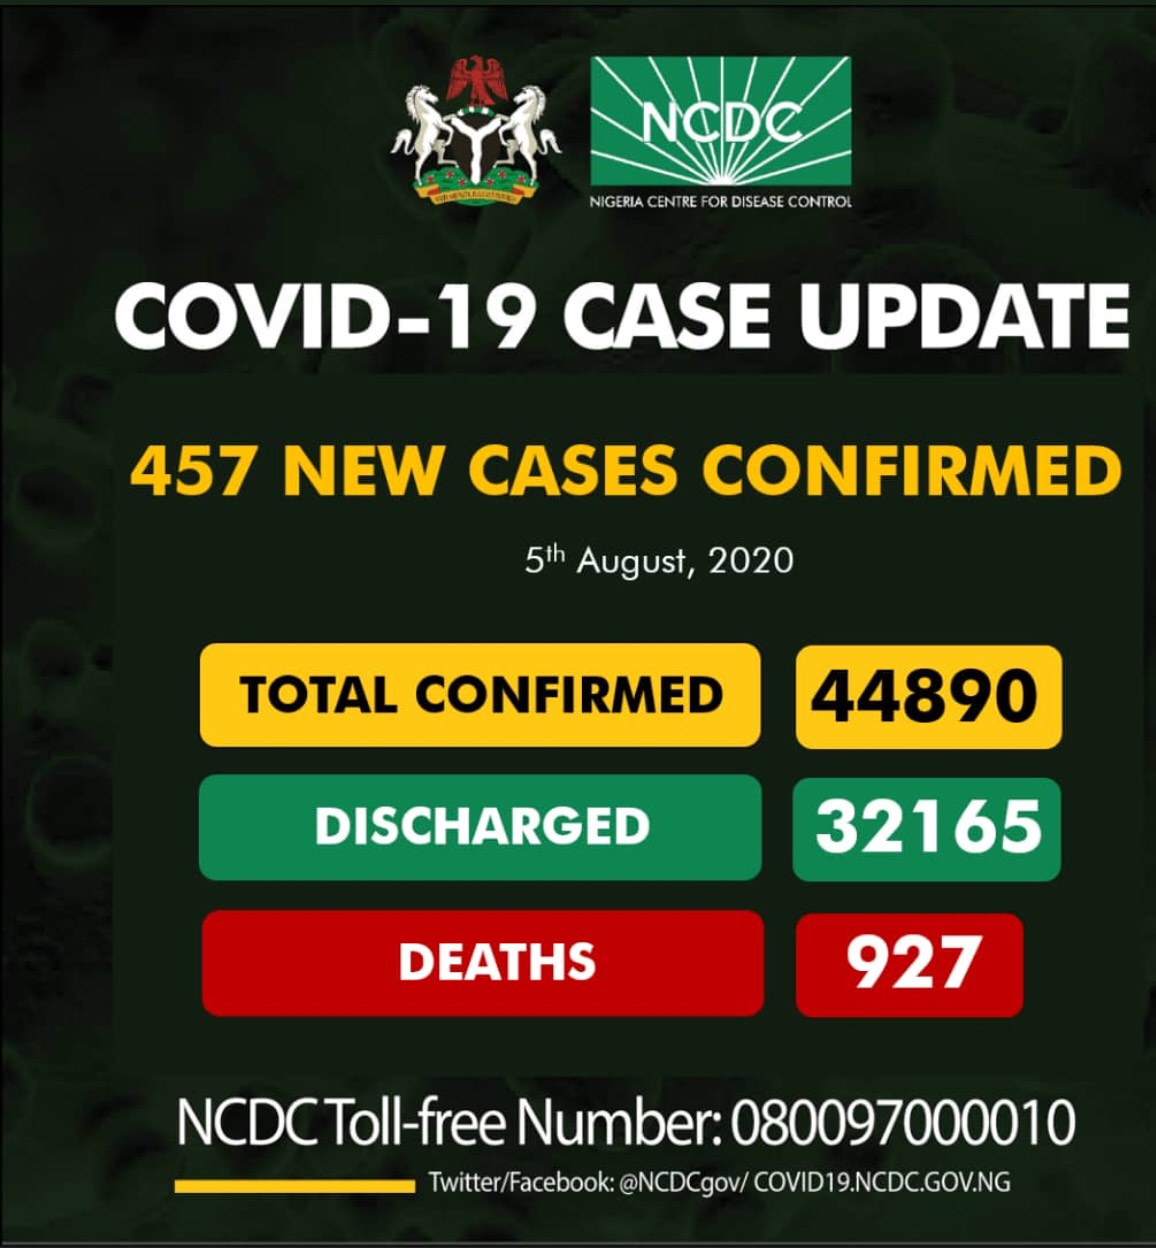 NCDC announces 457 new Covid-19 infections in Nigeria